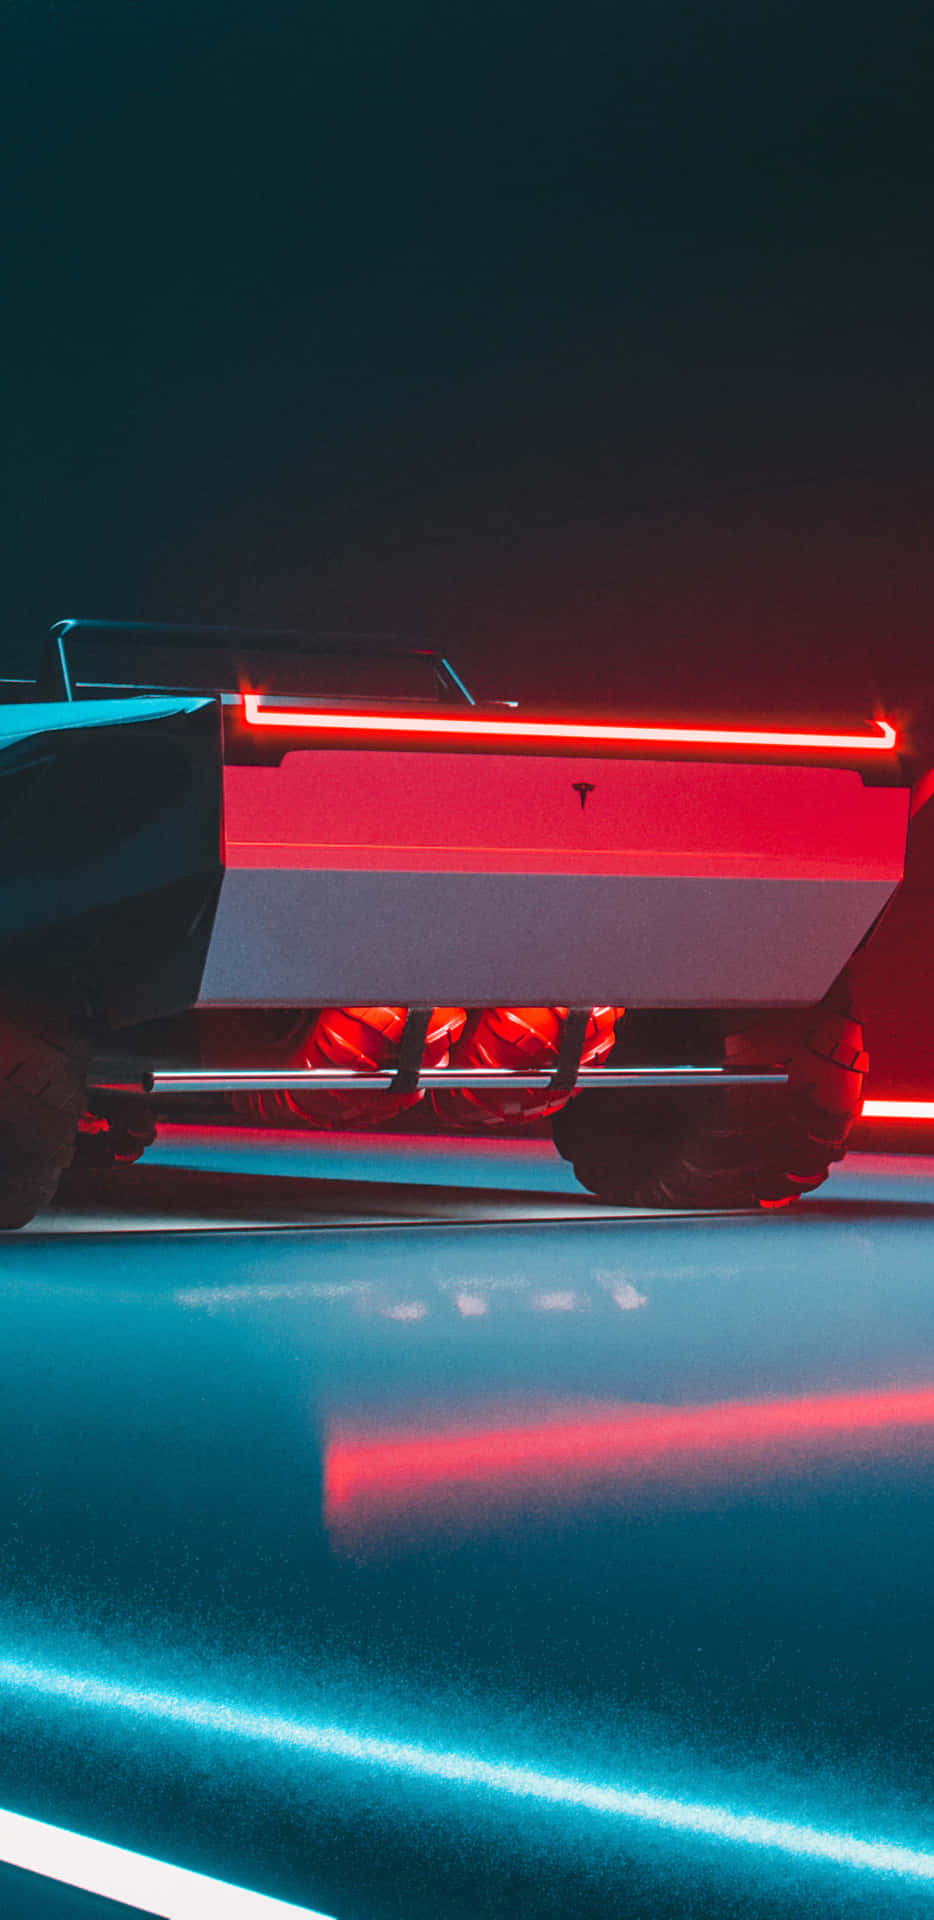 A Futuristic Car With Neon Lights On The Road